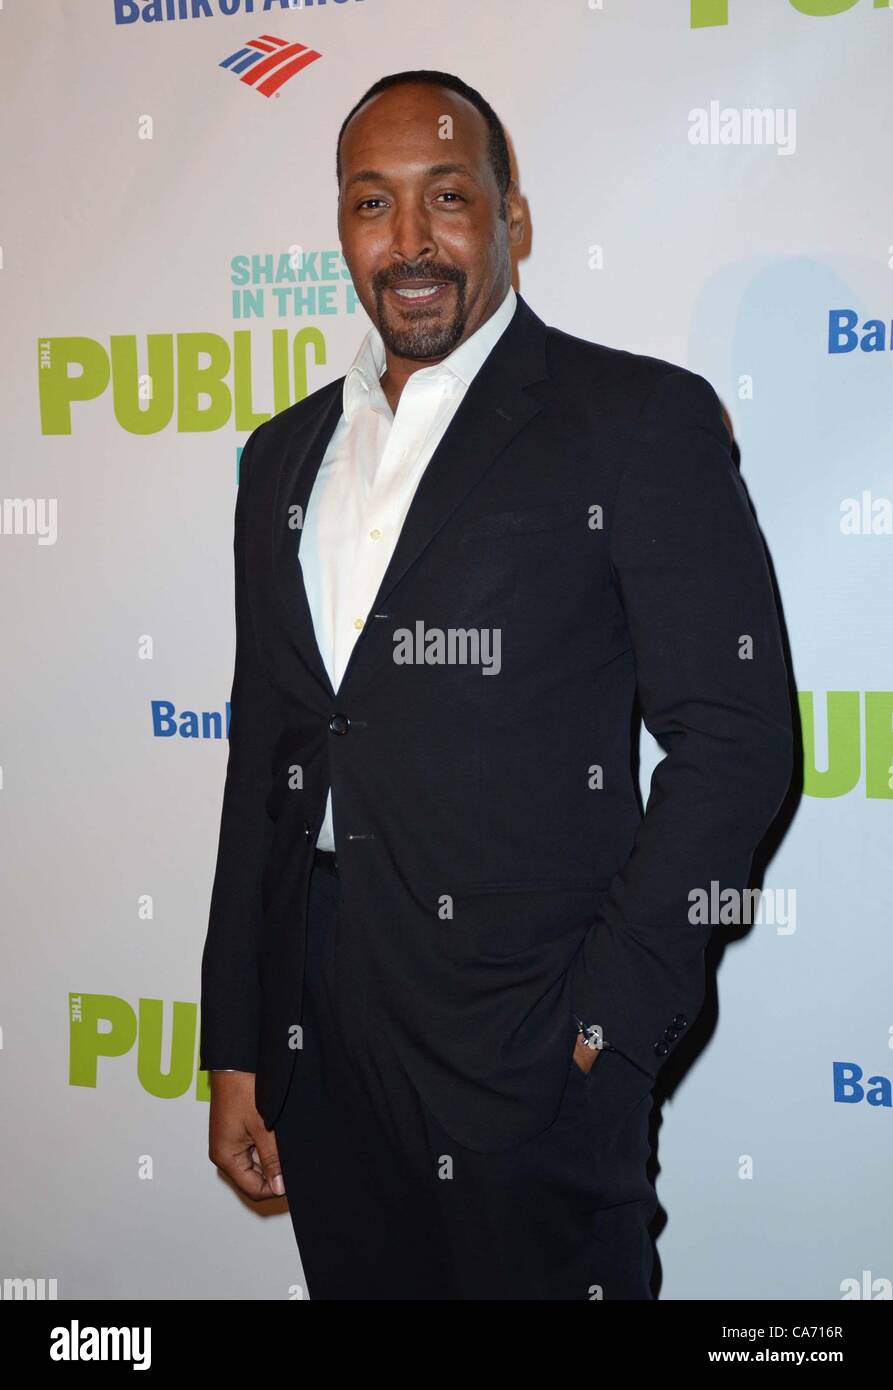 Jesse L Martin at arrivals for 50th Anniversary Public Theater Gala Honoring Al Pacino, Delacorte Theater, Central Park, New York, NY June 18, 2012. Photo By: Derek Storm/Everett Collection Stock Photo